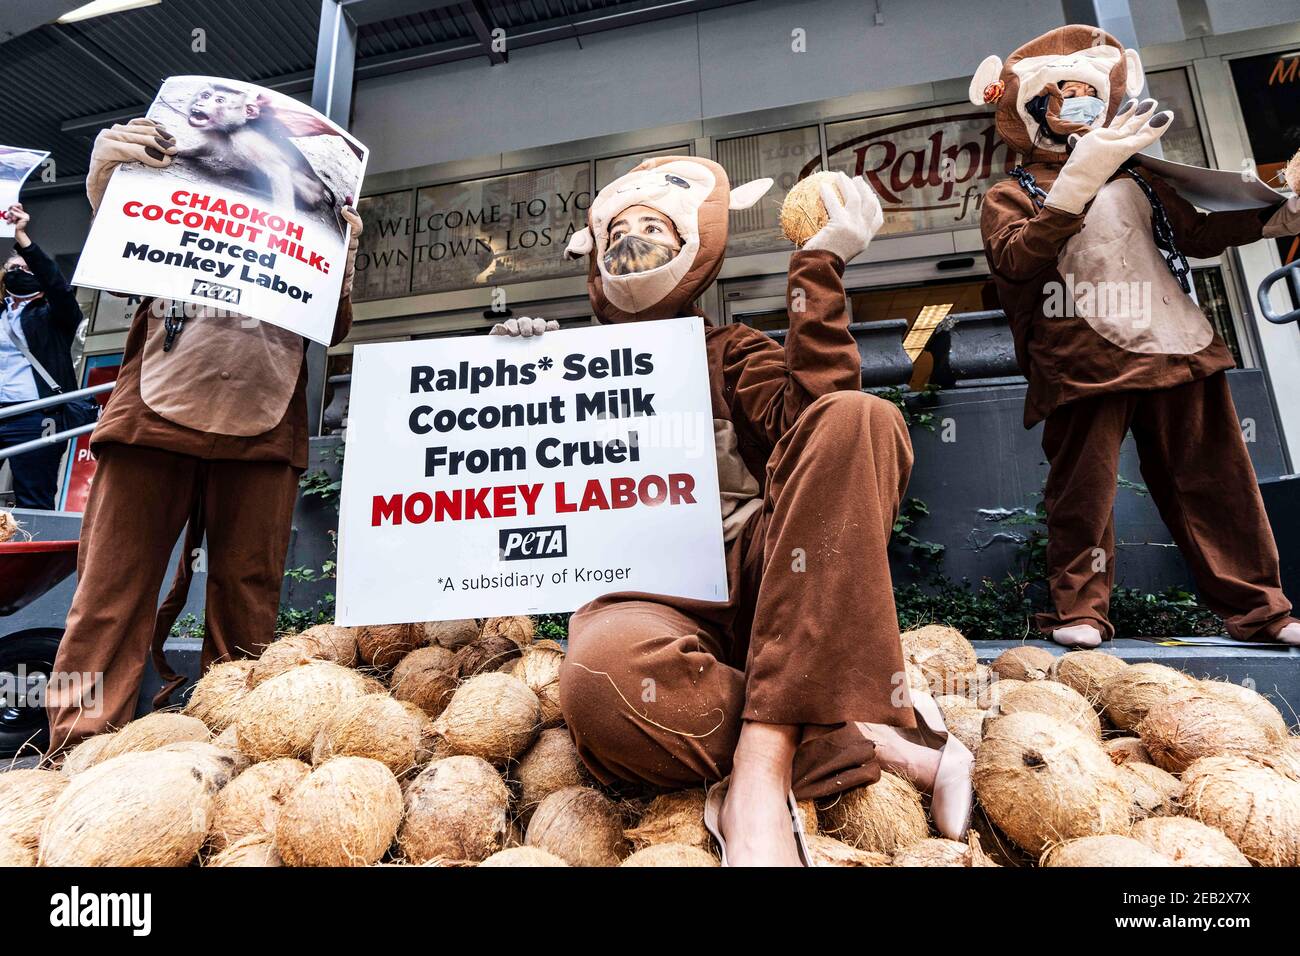 Los Angeles, California, USA. 16th Nov, 2020. PETA activists dressed in monkey costumes hold placards and coconuts during a protest against Thailand's Chaokoh brand for allegedly forcing monkeys to climb up trees to collect coconuts and keeping them in cruel conditions. Major U.S. retailers such as Costco and Target stopped selling Chaokoh coconut milk over allegations of forced monkey labor. Credit: Ronen Tivony/SOPA Images/ZUMA Wire/Alamy Live News Stock Photo